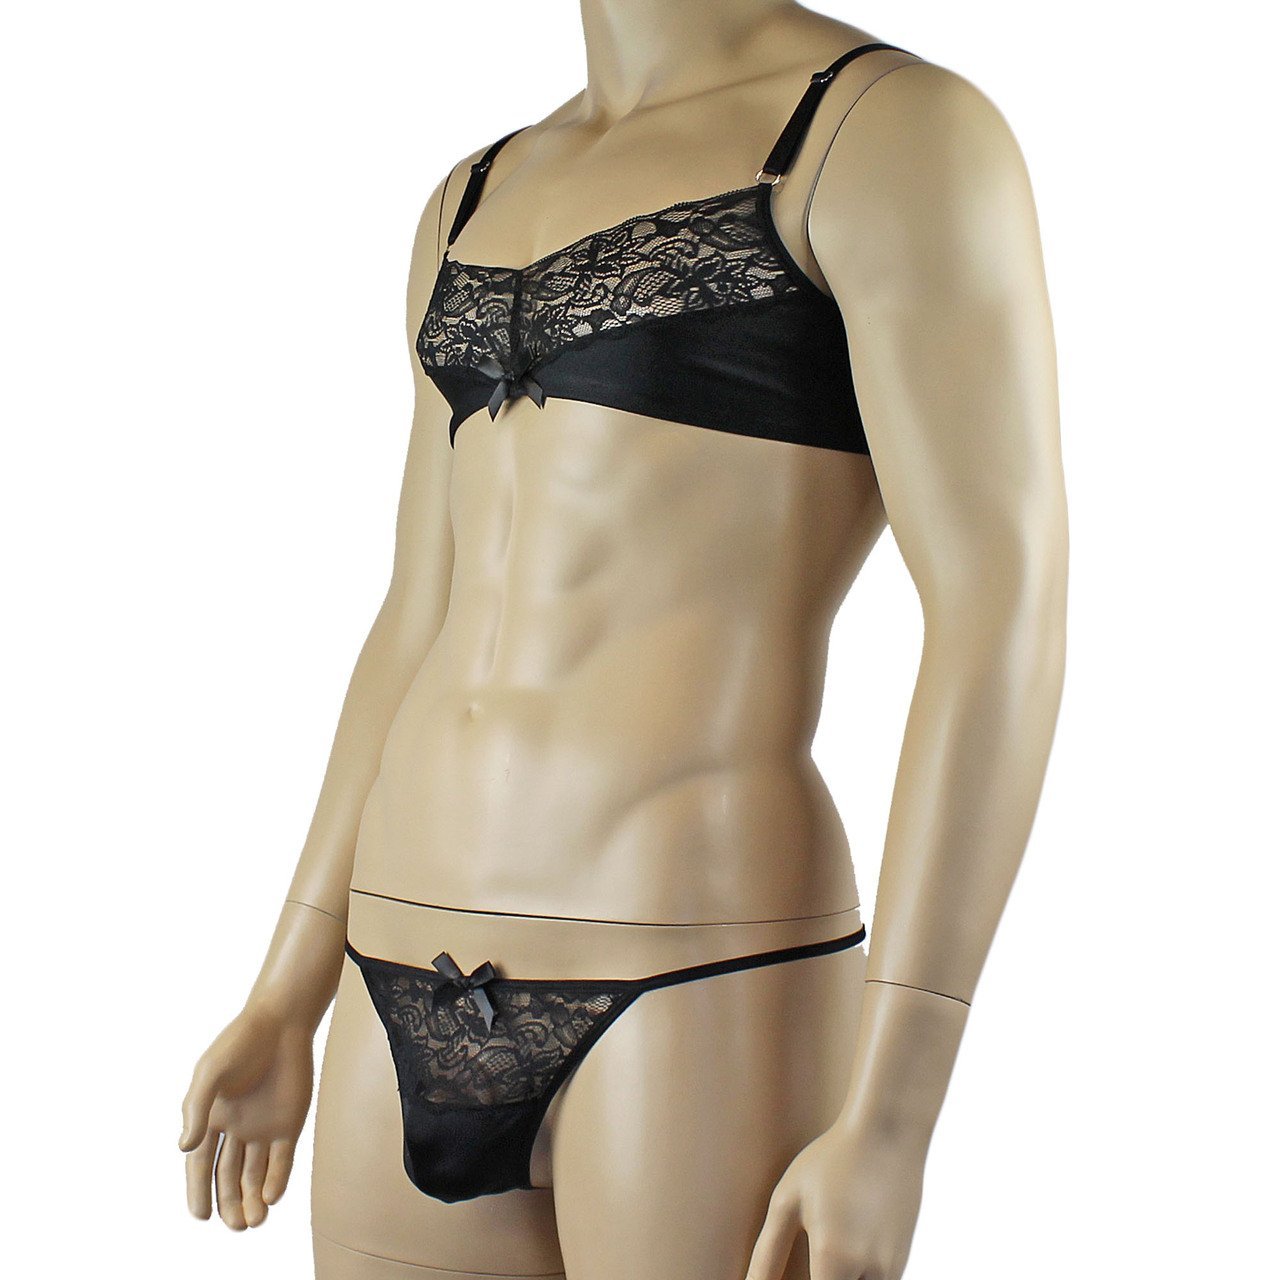 Mens Glamour Bra Top and Pouch G string with Lace Trim (black plus other colours)